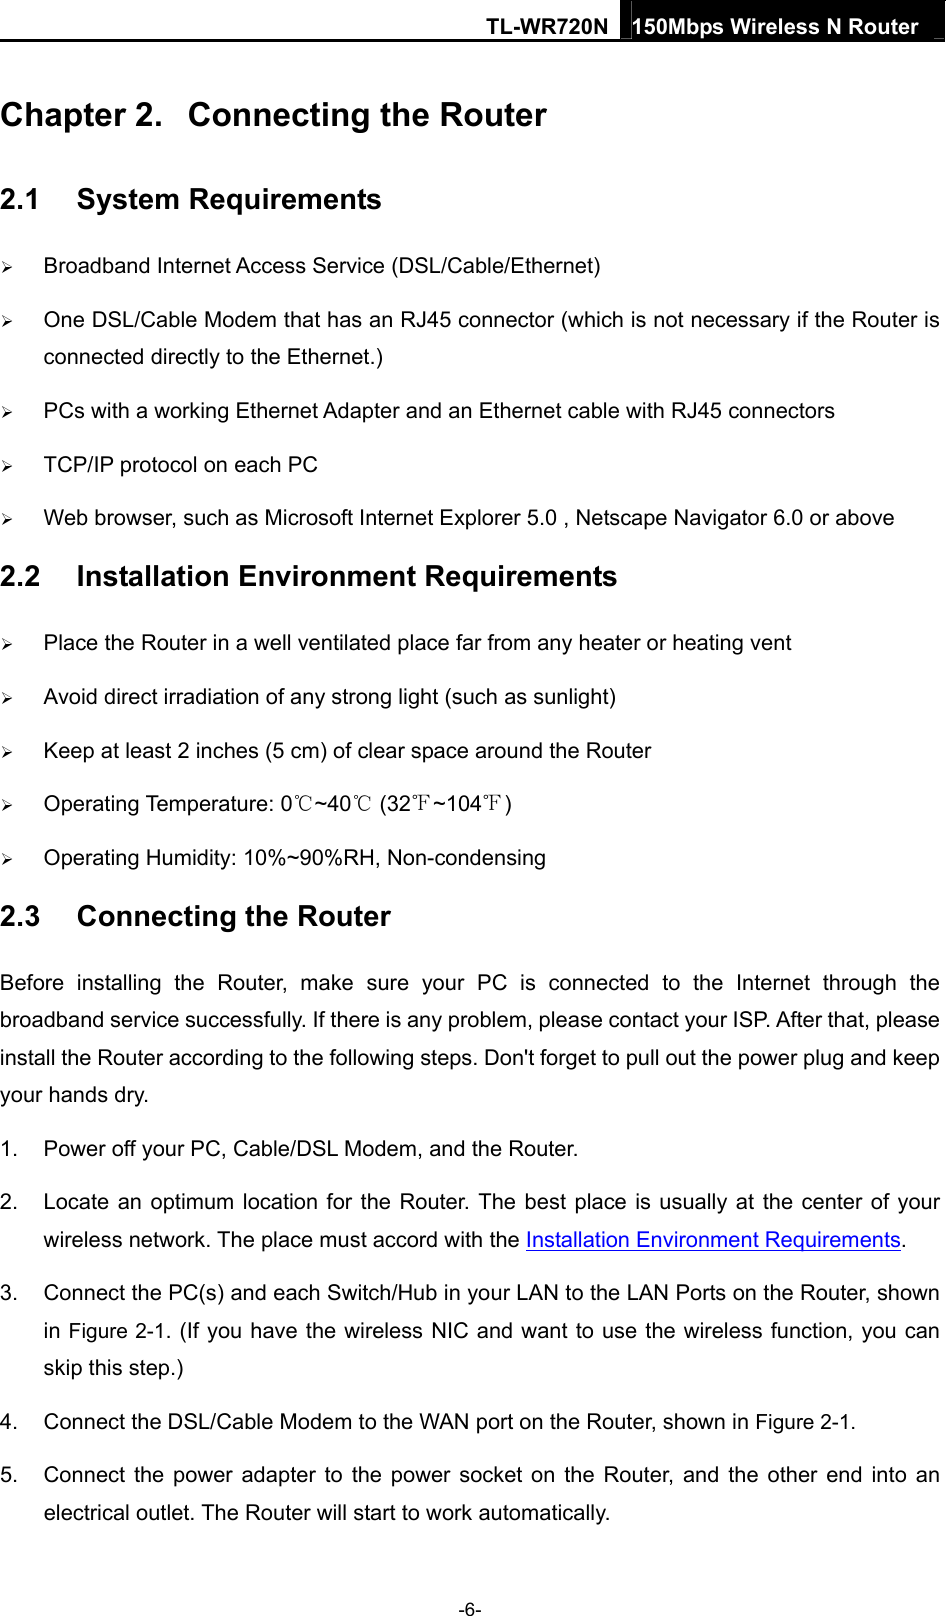 TL-WR720N 150Mbps Wireless N Router  Chapter 2.  Connecting the Router 2.1  System Requirements  Broadband Internet Access Service (DSL/Cable/Ethernet)  One DSL/Cable Modem that has an RJ45 connector (which is not necessary if the Router is connected directly to the Ethernet.)  PCs with a working Ethernet Adapter and an Ethernet cable with RJ45 connectors    TCP/IP protocol on each PC  Web browser, such as Microsoft Internet Explorer 5.0 , Netscape Navigator 6.0 or above 2.2  Installation Environment Requirements  Place the Router in a well ventilated place far from any heater or heating vent    Avoid direct irradiation of any strong light (such as sunlight)  Keep at least 2 inches (5 cm) of clear space around the Router  Operating Temperature: 0~40  (32 ~104 )   Operating Humidity: 10%~90%RH, Non-condensing 2.3  Connecting the Router Before installing the Router, make sure your PC is connected to the Internet through the broadband service successfully. If there is any problem, please contact your ISP. After that, please install the Router according to the following steps. Don&apos;t forget to pull out the power plug and keep your hands dry. 1.  Power off your PC, Cable/DSL Modem, and the Router.   2.  Locate an optimum location for the Router. The best place is usually at the center of your wireless network. The place must accord with the Installation Environment Requirements.  3.  Connect the PC(s) and each Switch/Hub in your LAN to the LAN Ports on the Router, shown in Figure 2-1. (If you have the wireless NIC and want to use the wireless function, you can skip this step.) 4.  Connect the DSL/Cable Modem to the WAN port on the Router, shown in Figure 2-1. 5.  Connect the power adapter to the power socket on the Router, and the other end into an electrical outlet. The Router will start to work automatically. -6- 